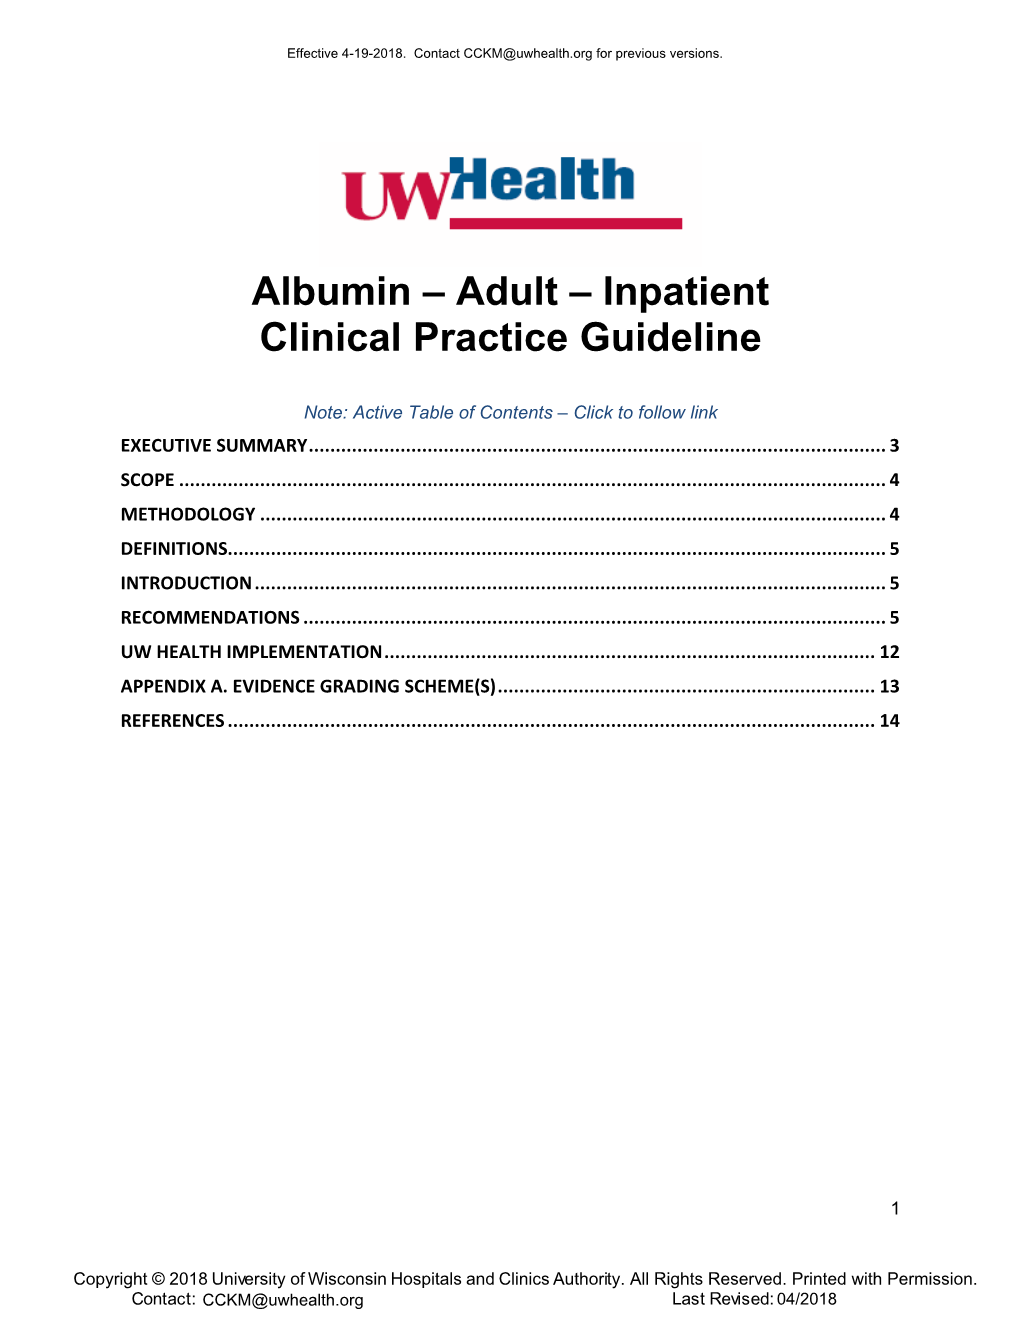 Albumin – Adult – Inpatient Clinical Practice Guideline